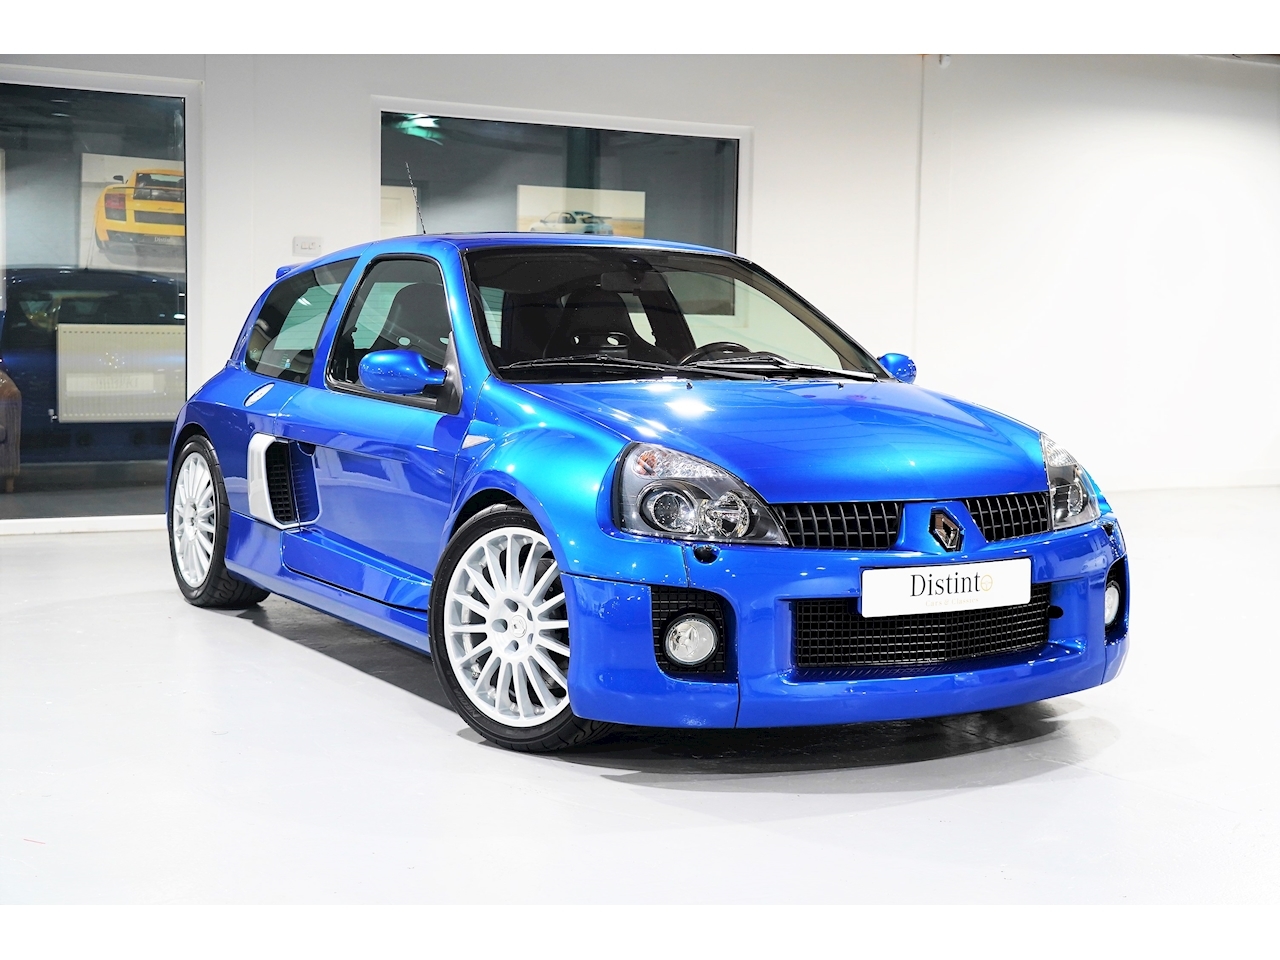 vijver voor Ook Used 2004 Renault 2004 Renault Clio Renaultsport 3.0 V6 255 - Phase 2 -  Iliad Blue - Left Hand Drive For Sale in West Midlands | Distinto  Collection Limited